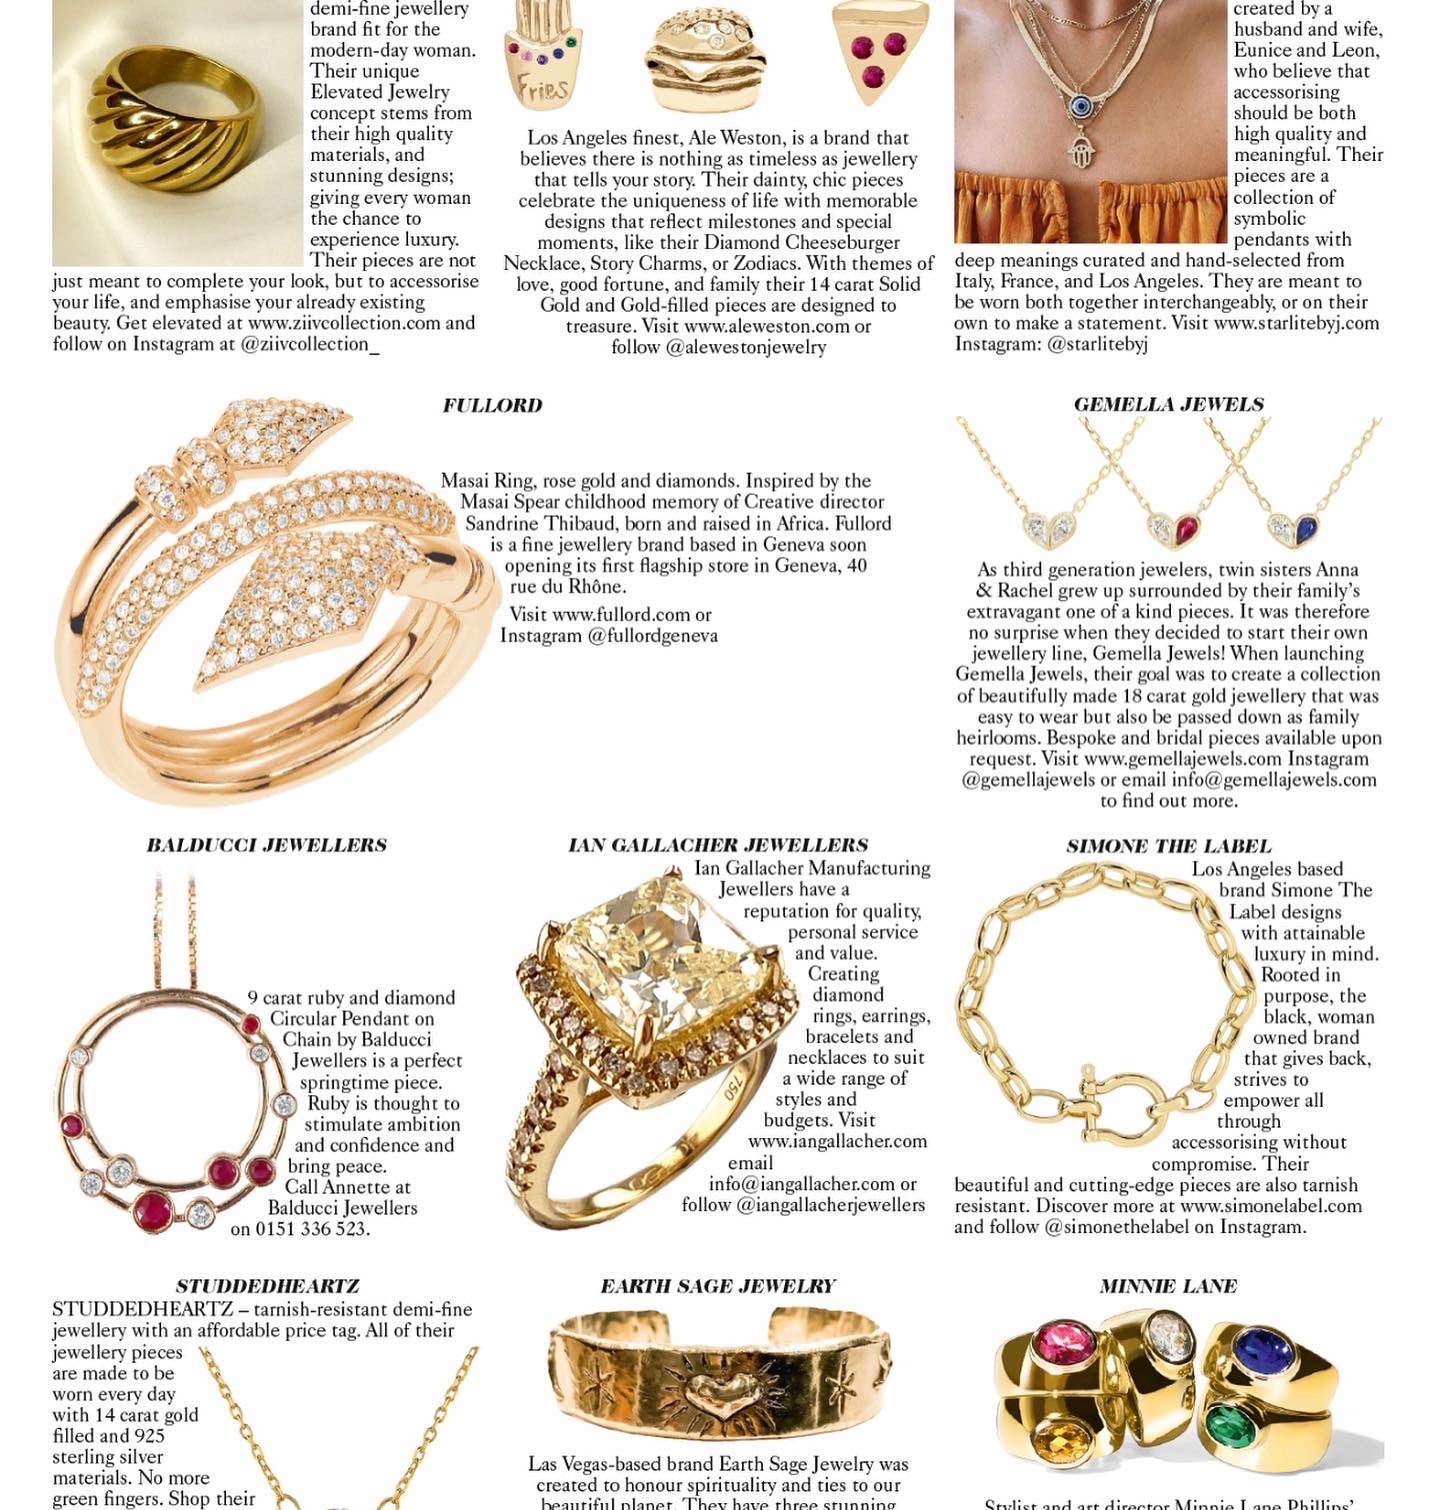 Earth Sage Jewelry in Vogue UK